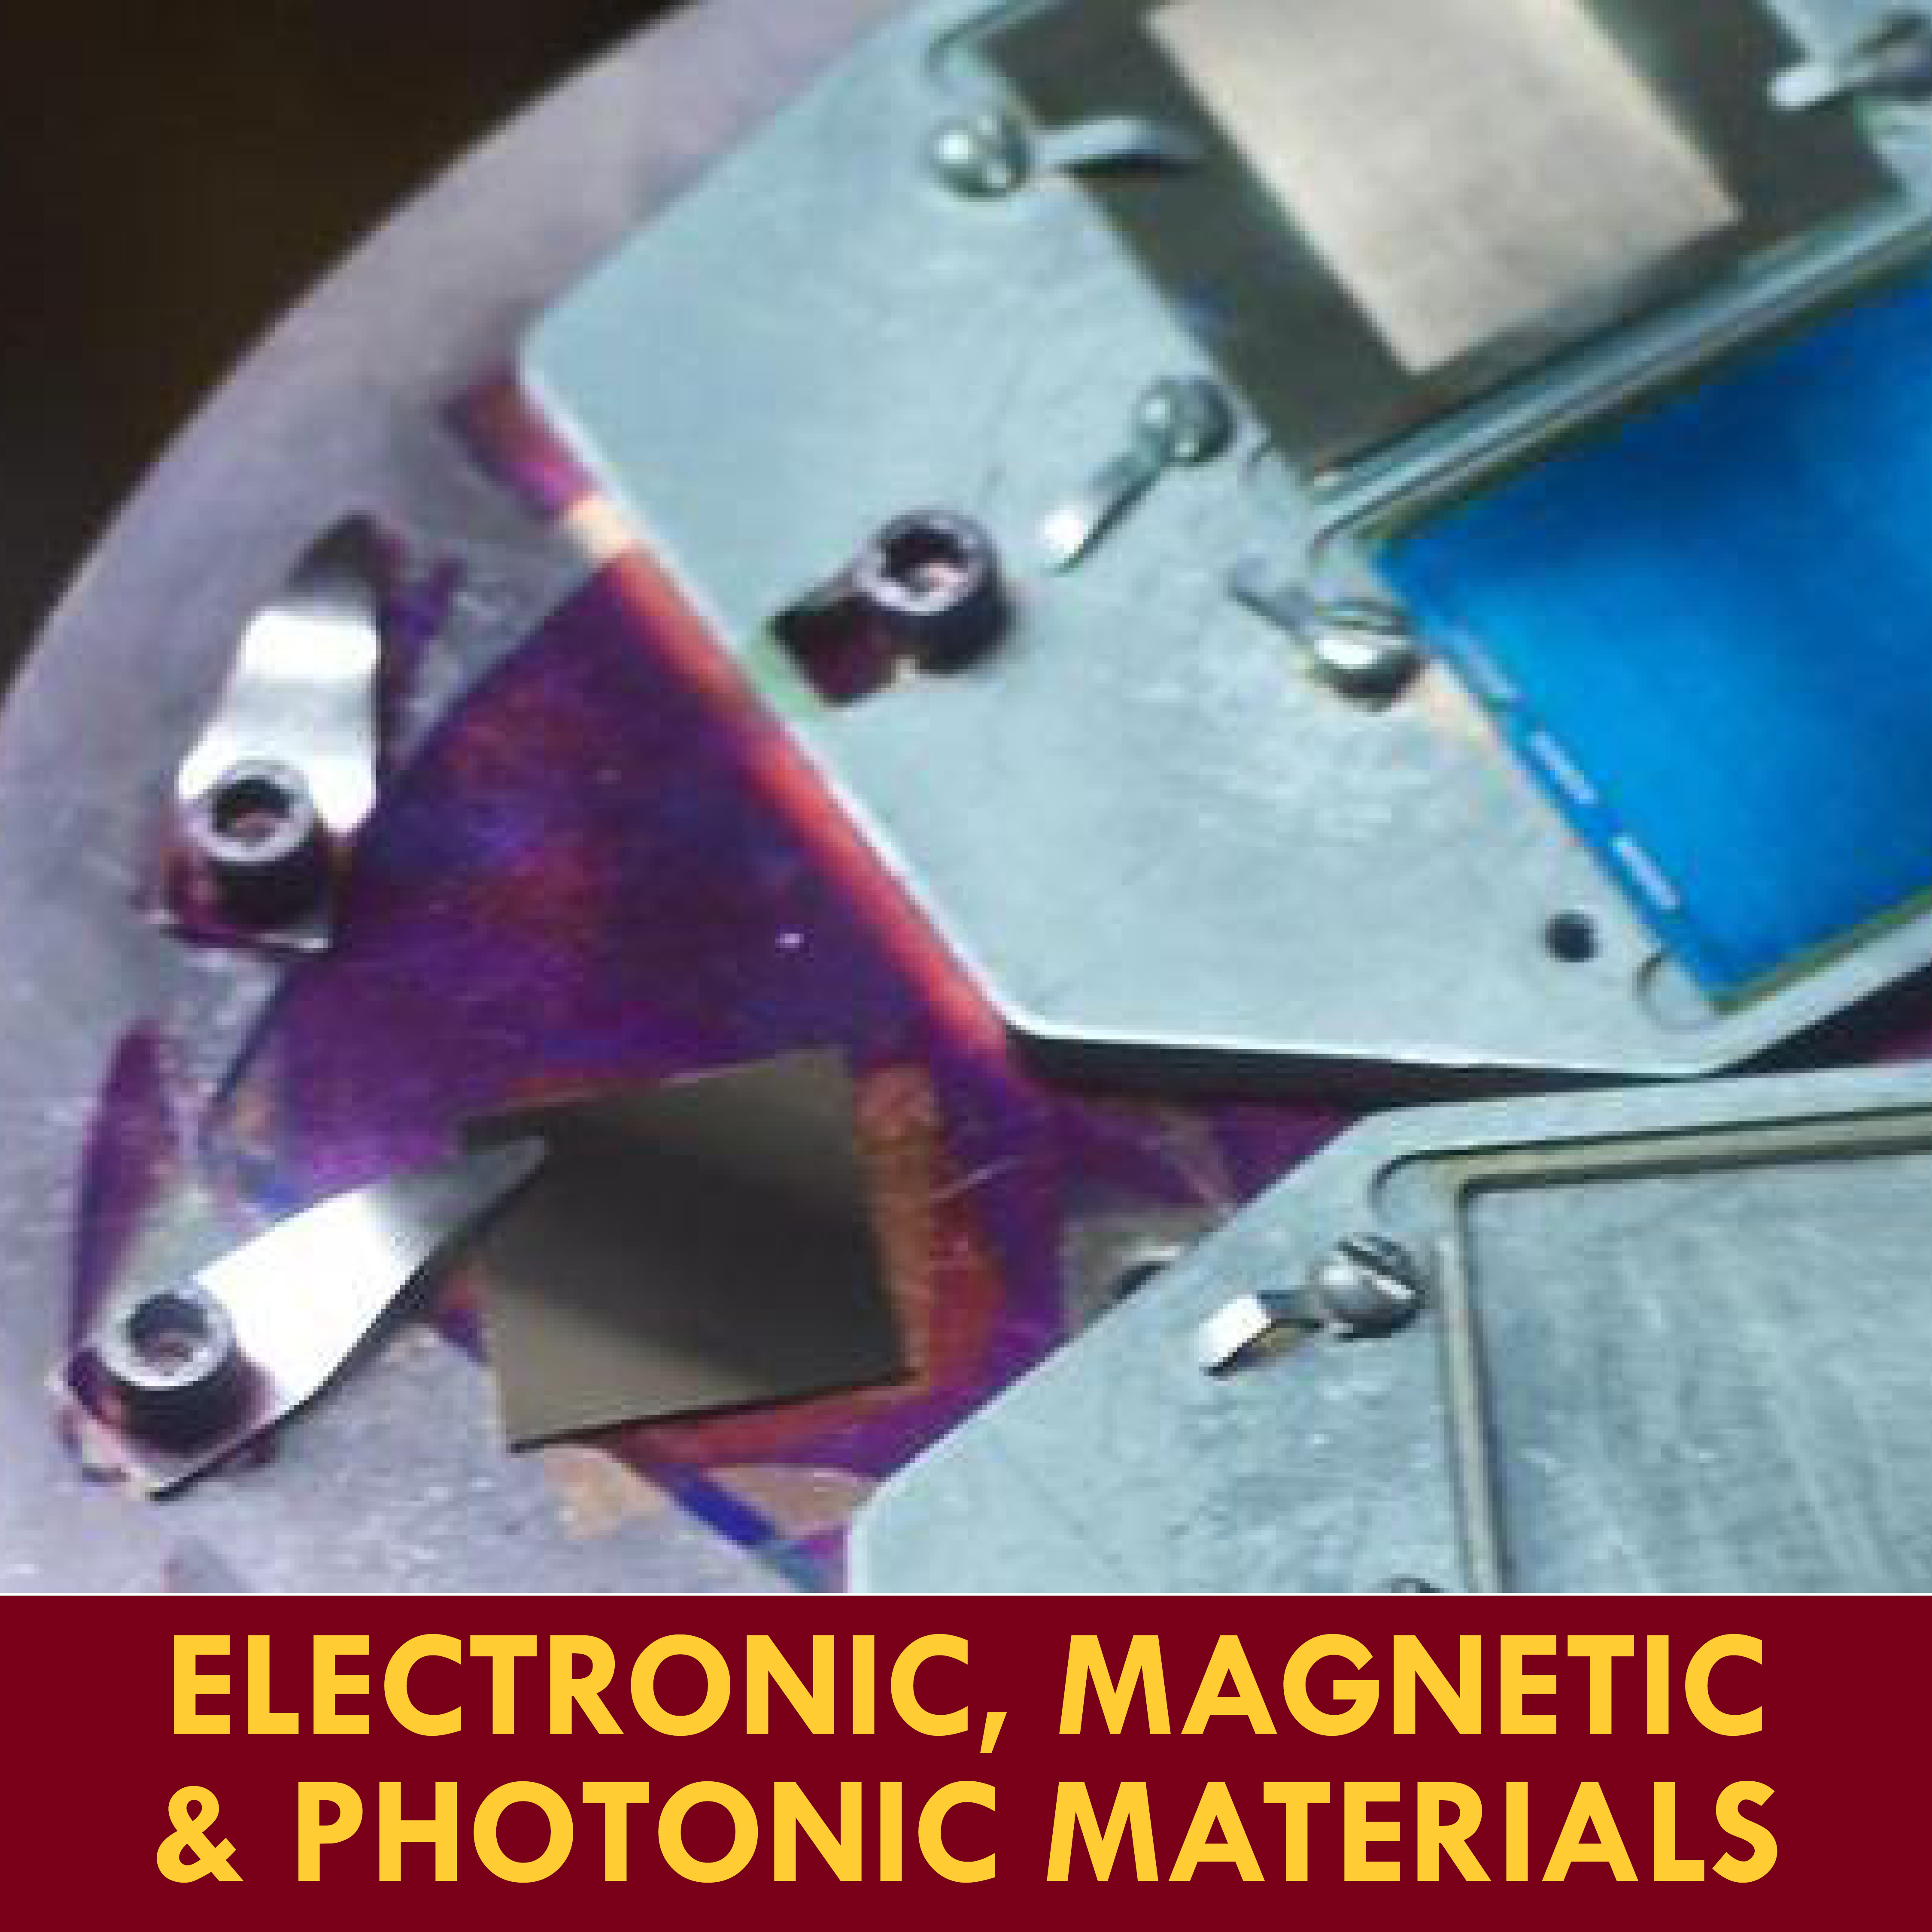 Electronic, Magnetic & Photonic Materials